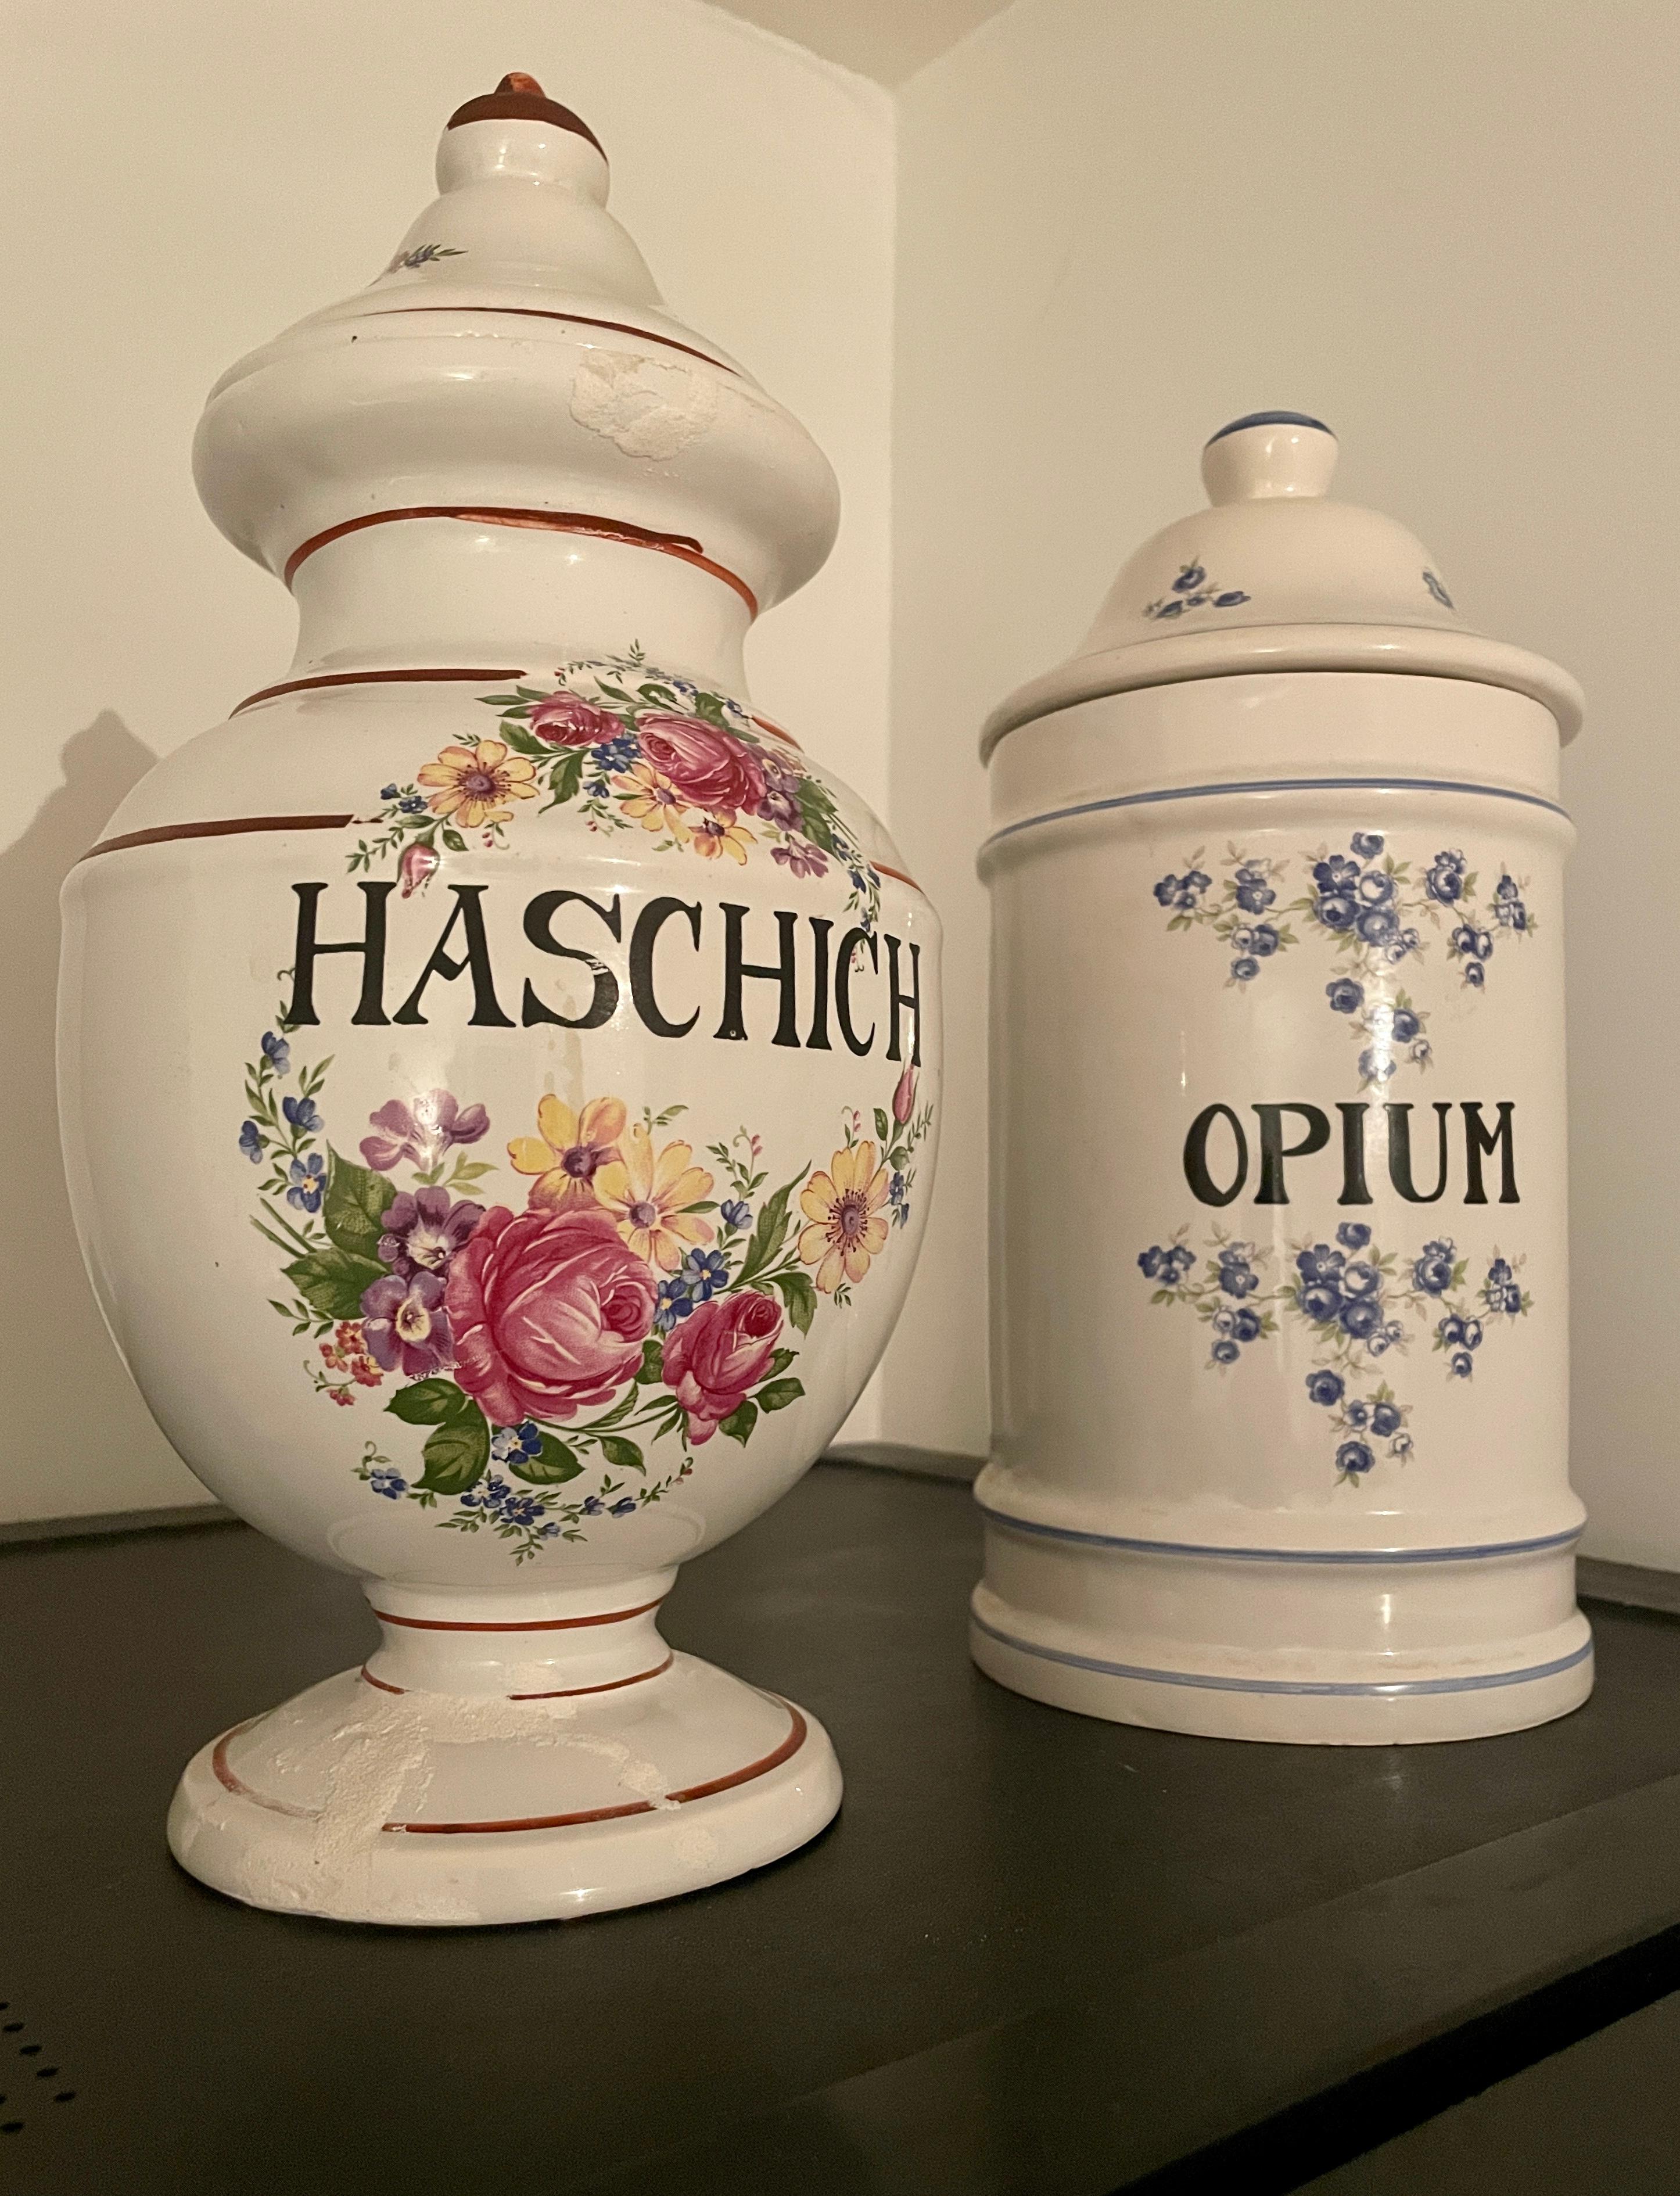 Big French Apothecary Jar Opium 19th Porcelain Limoges Drug Cocain Psychedelic For Sale 1